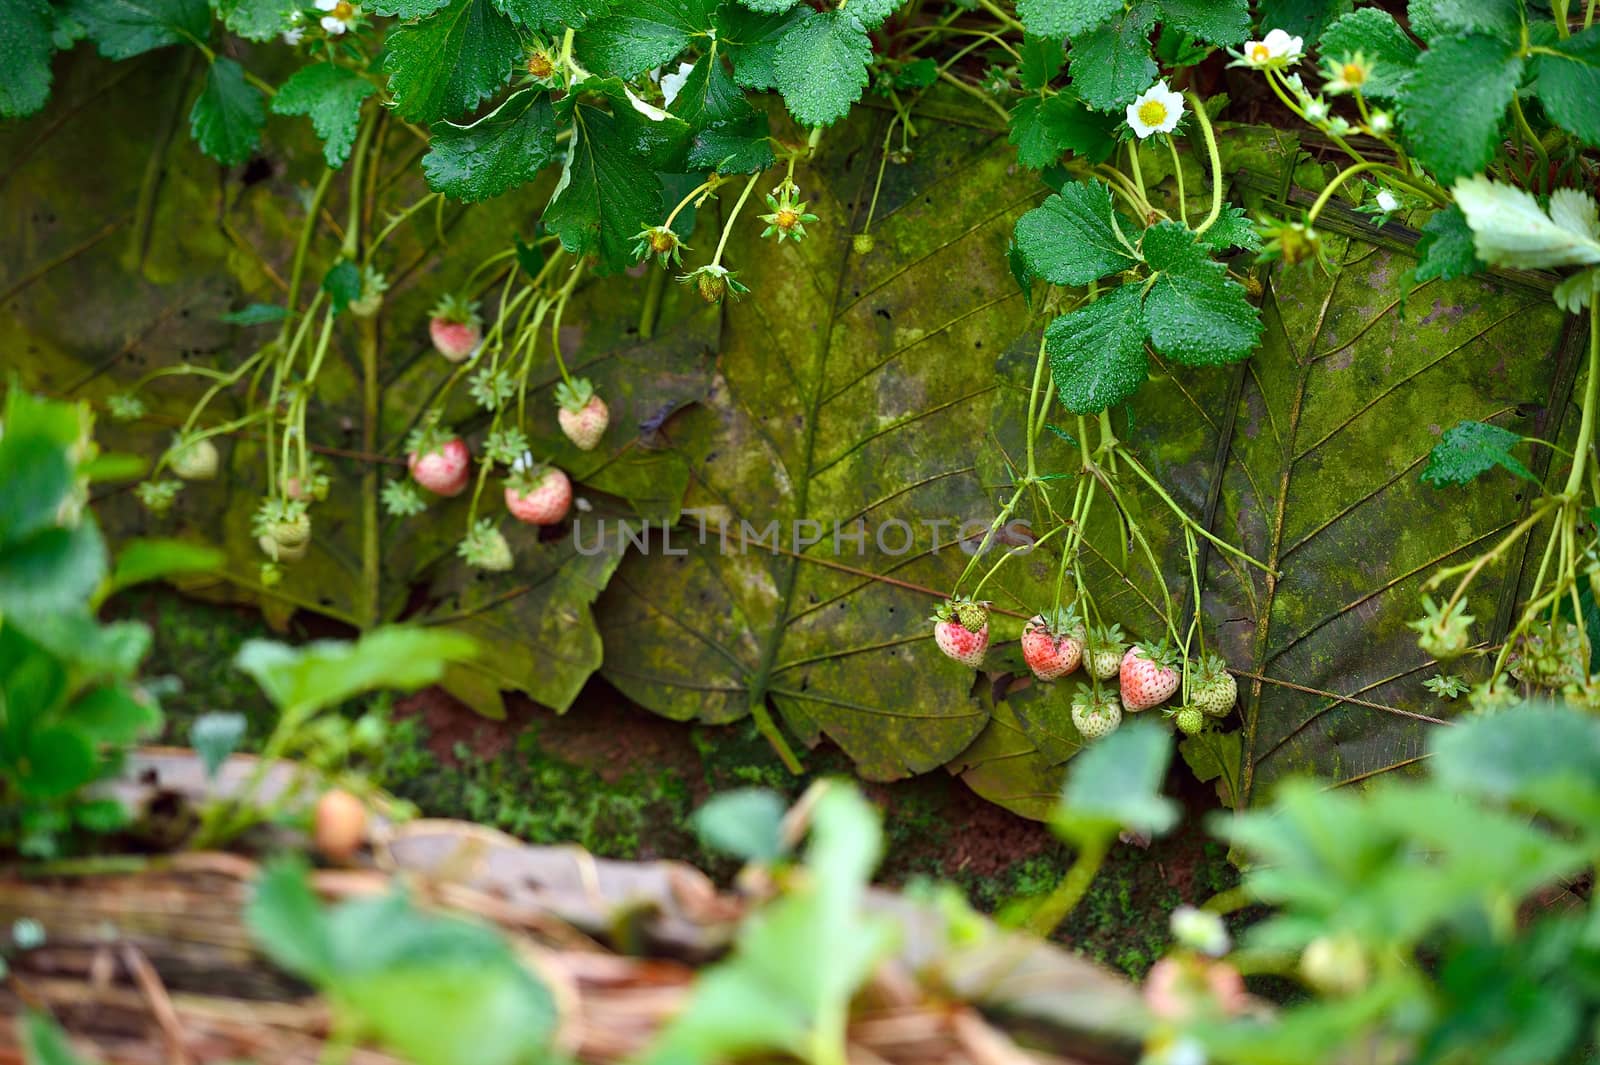 strawberry on a teak leaf at Doi angkhang , Chiangmai province, by think4photop